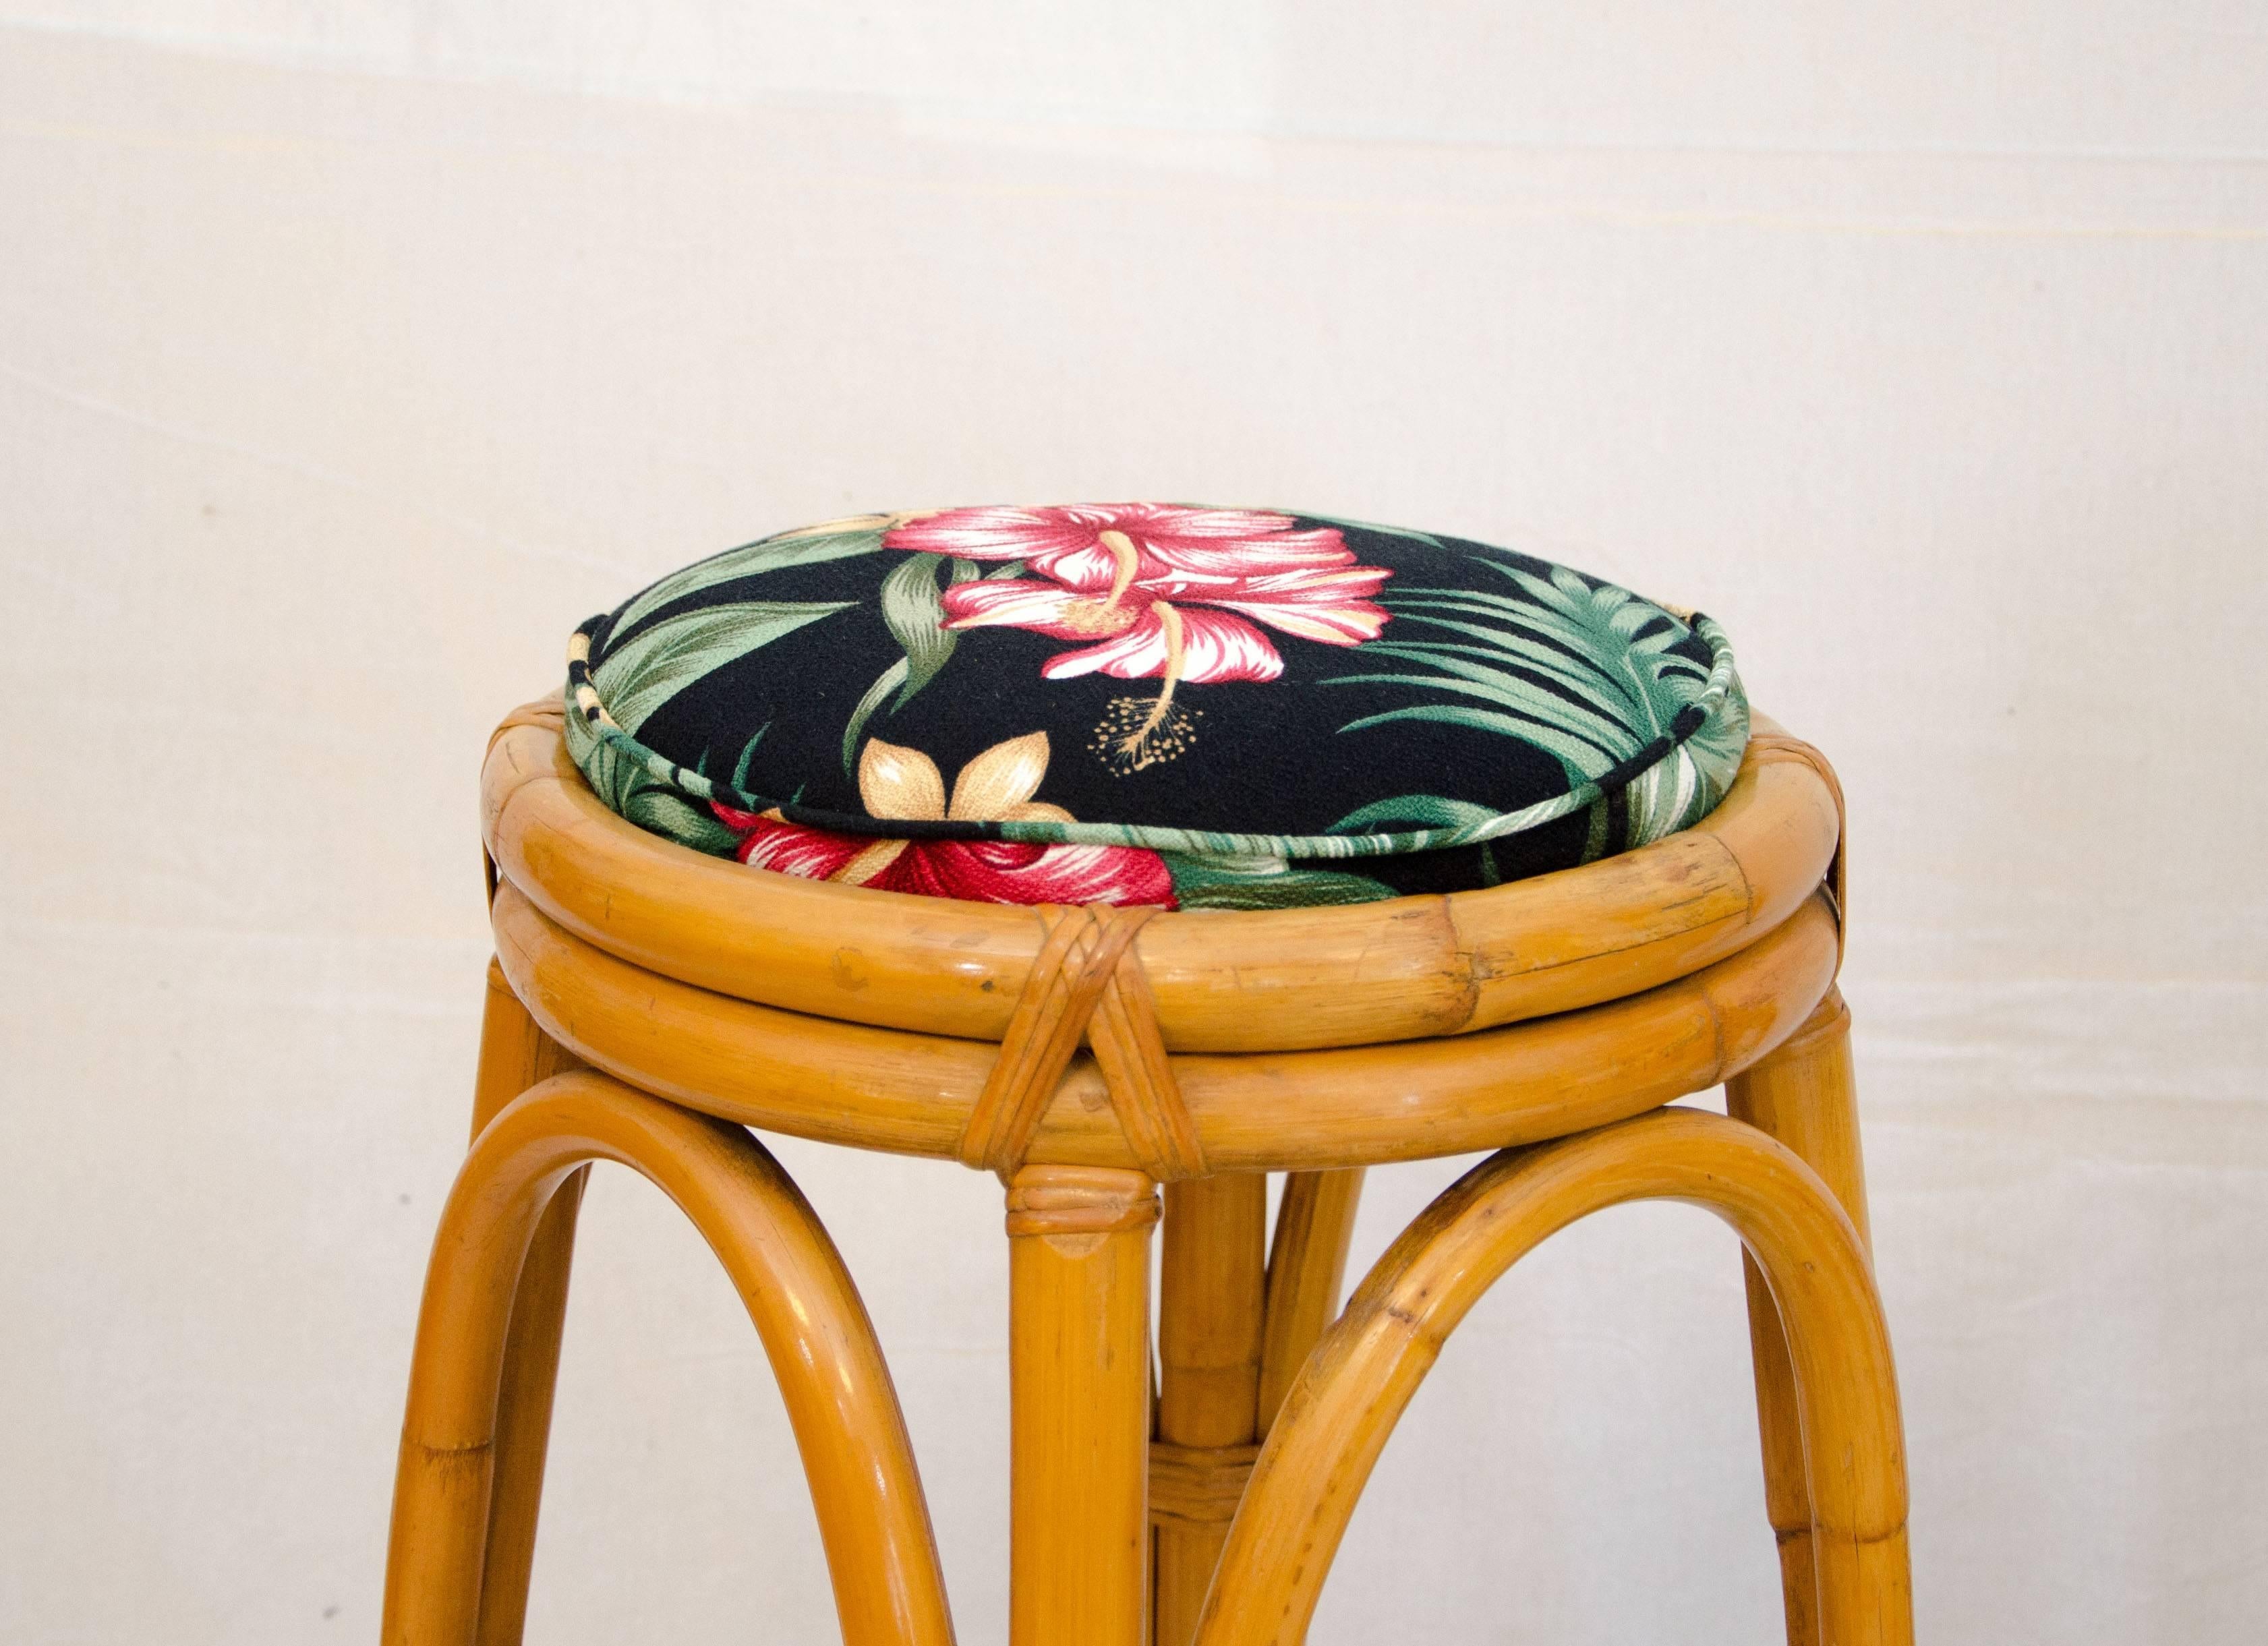 Nice pair of bar stools or counter stools to accent a tiki or tropical themed interior. Seats have been reupholstered with a tropical themed fabric. Seat is 14